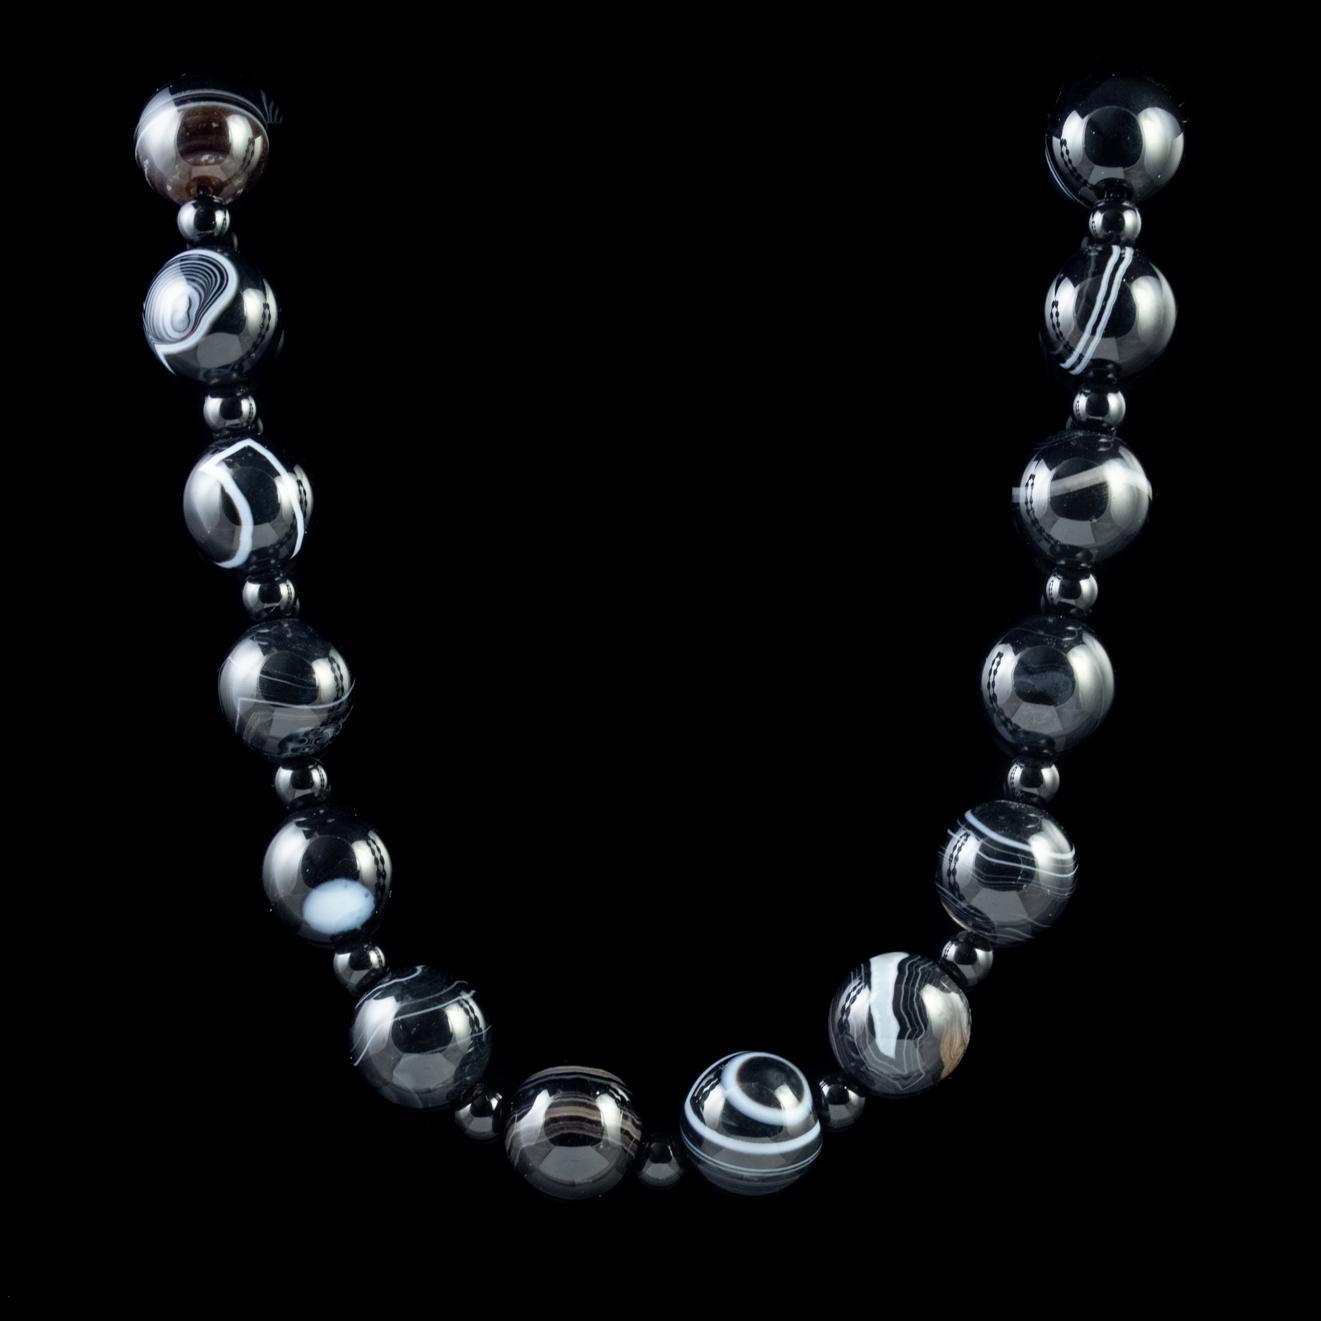 A lovely Antique Victorian necklace made up of spellbinding Bullseye Agate beads which have been polished to perfection with a lovely smooth touch. 

The Agates are a wonderful deep black colour and known as Bullseye Agates for their multiple white